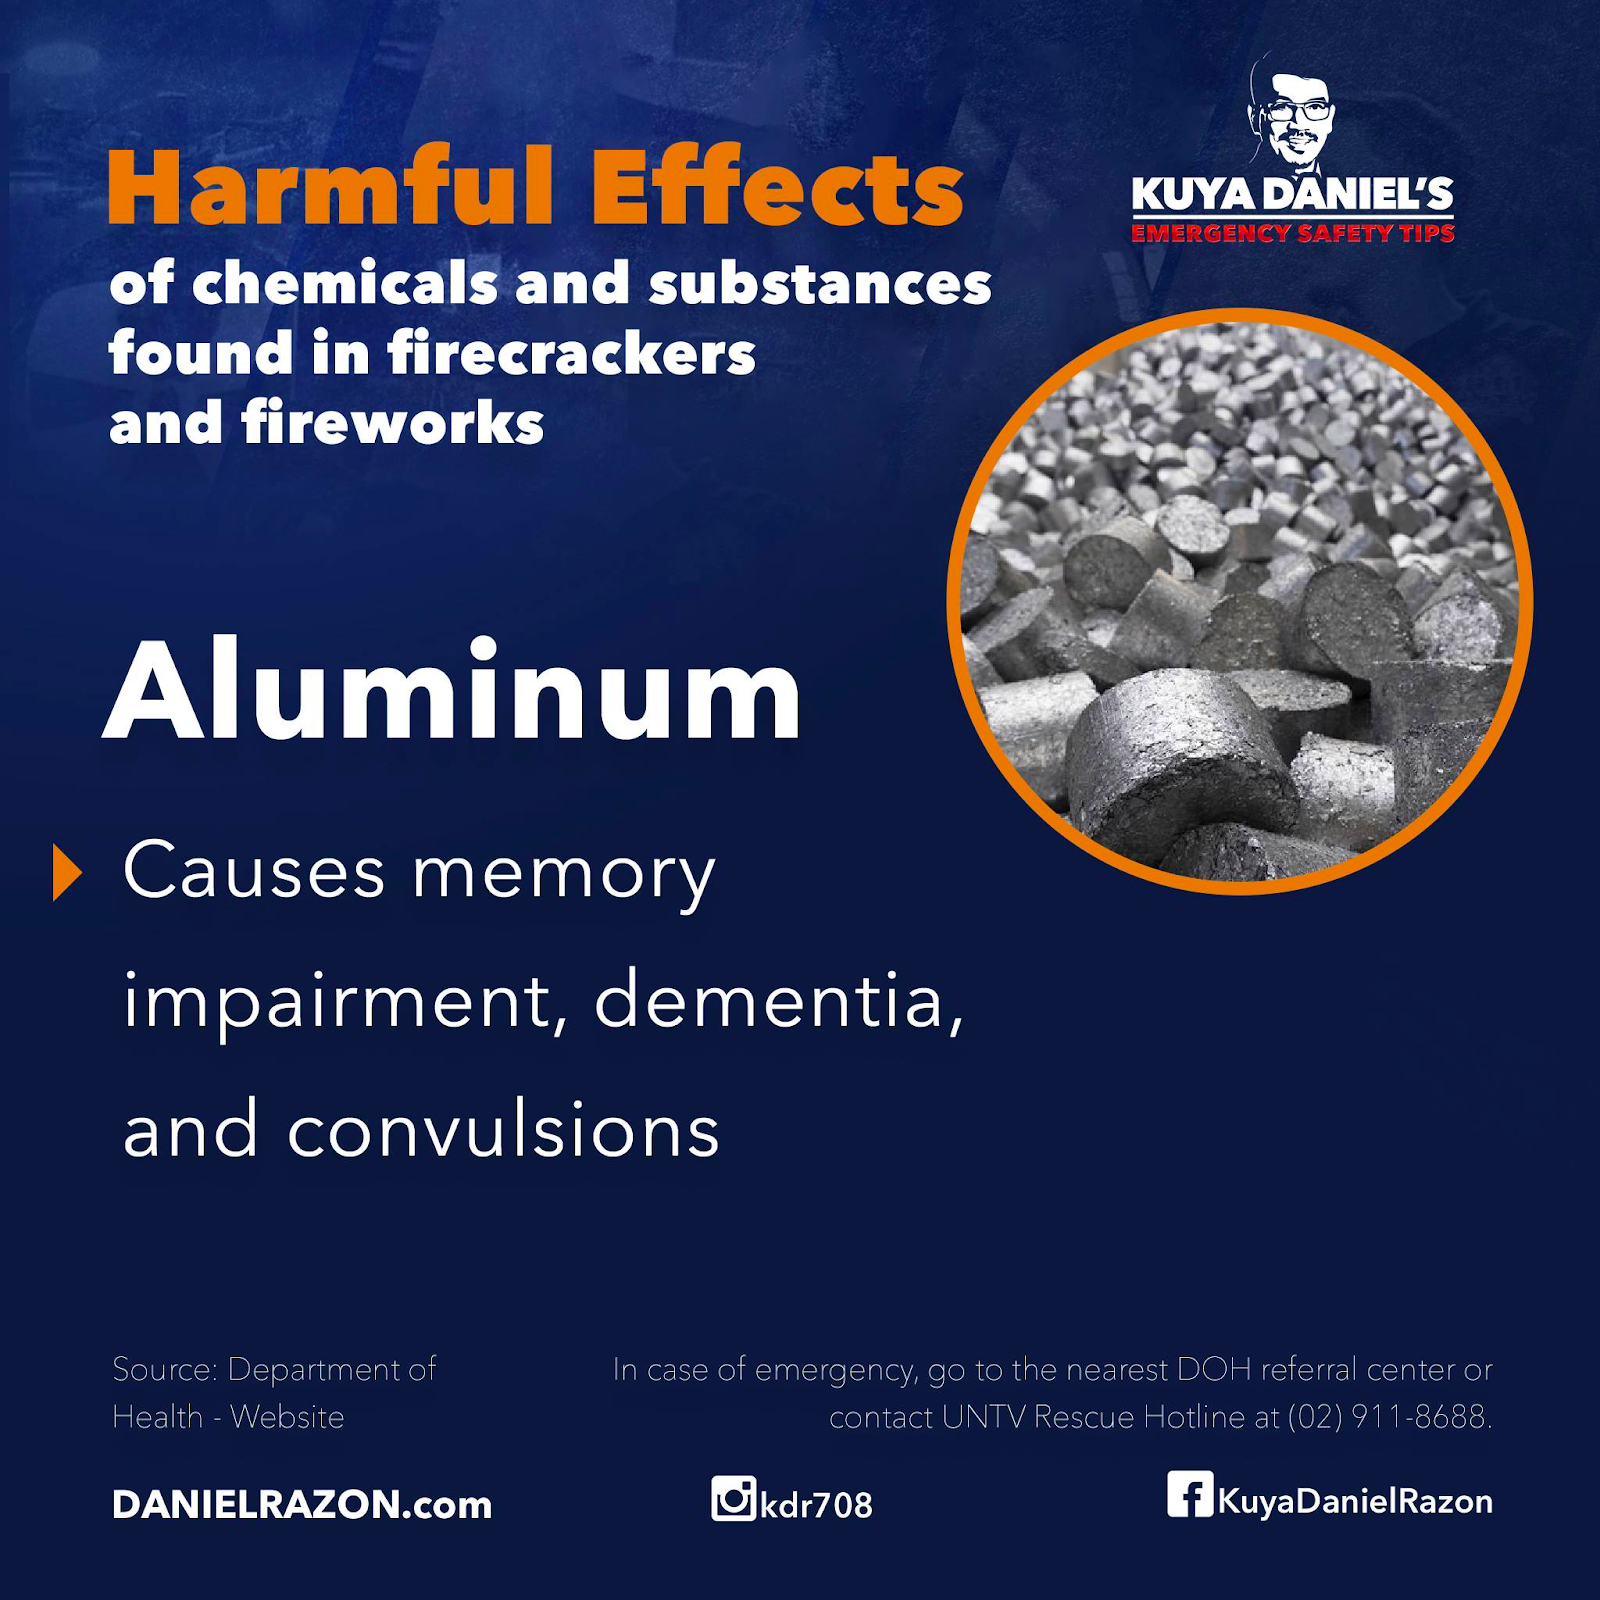 harmful effects of aluminum in fireworks and firecrackers